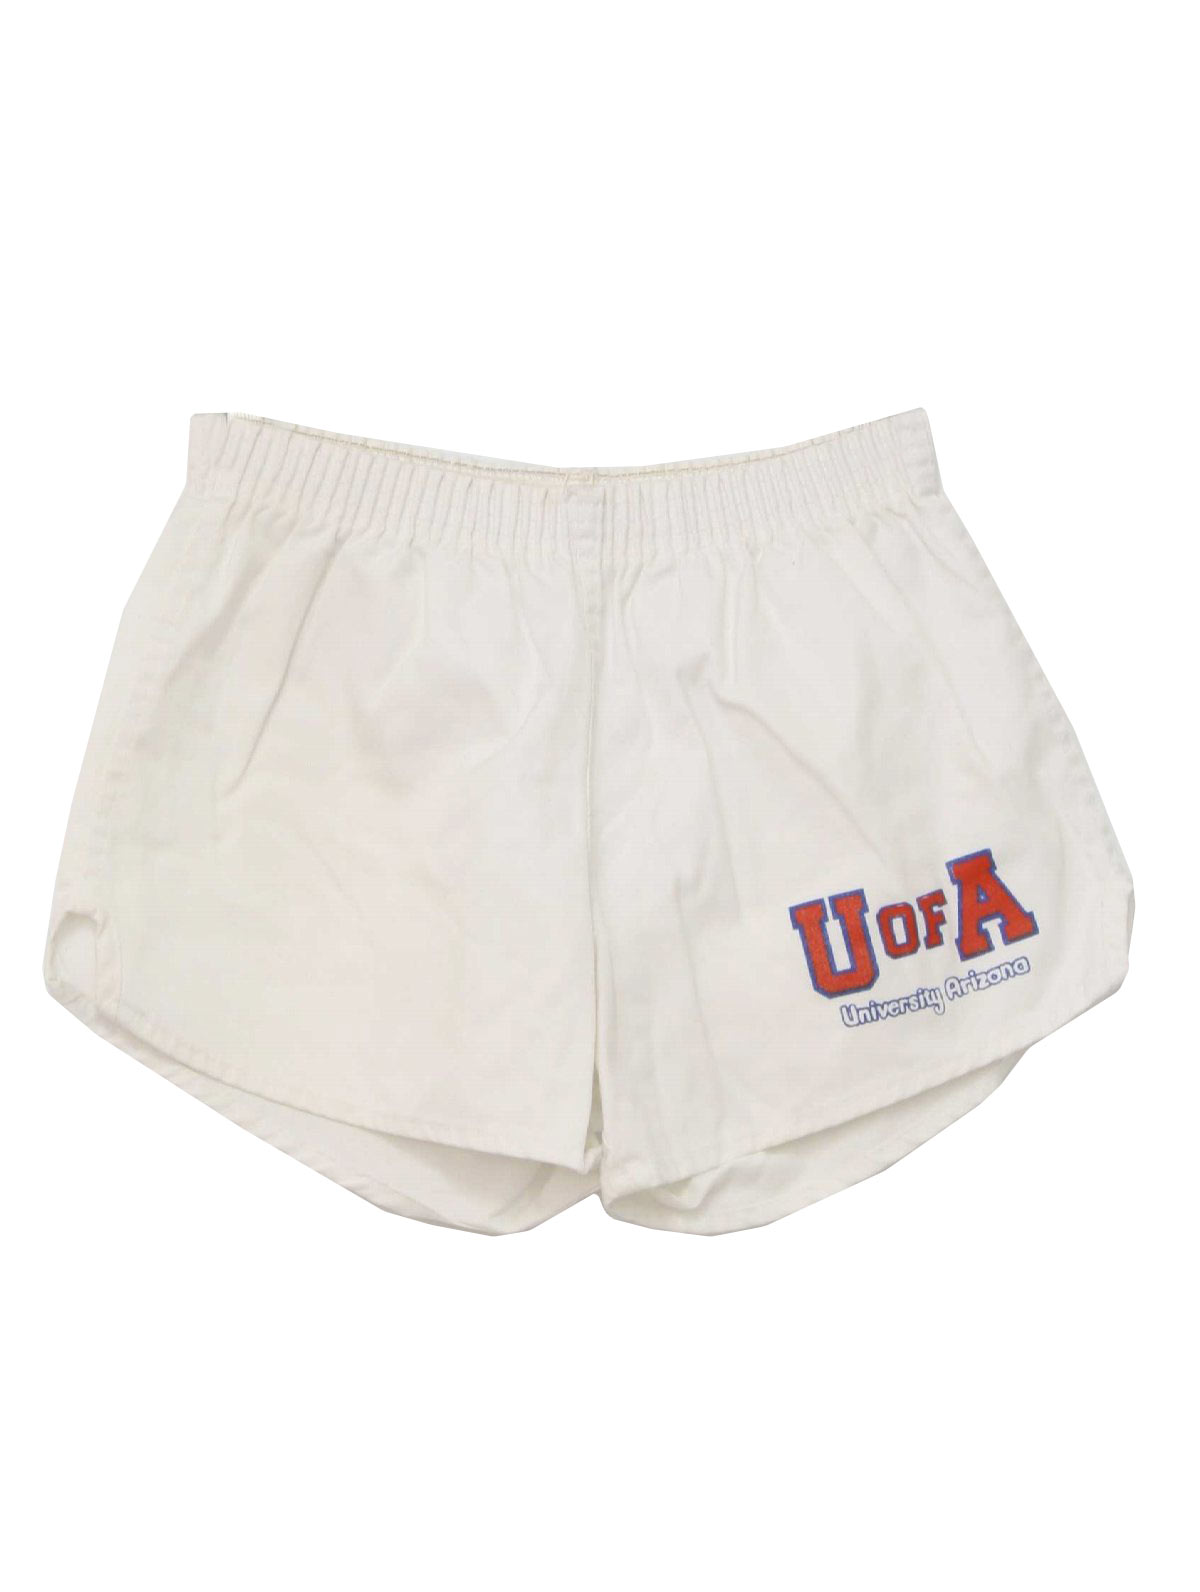 Retro 80's Shorts: 80s -Soffe Shorts- Mens white, red and blue ...